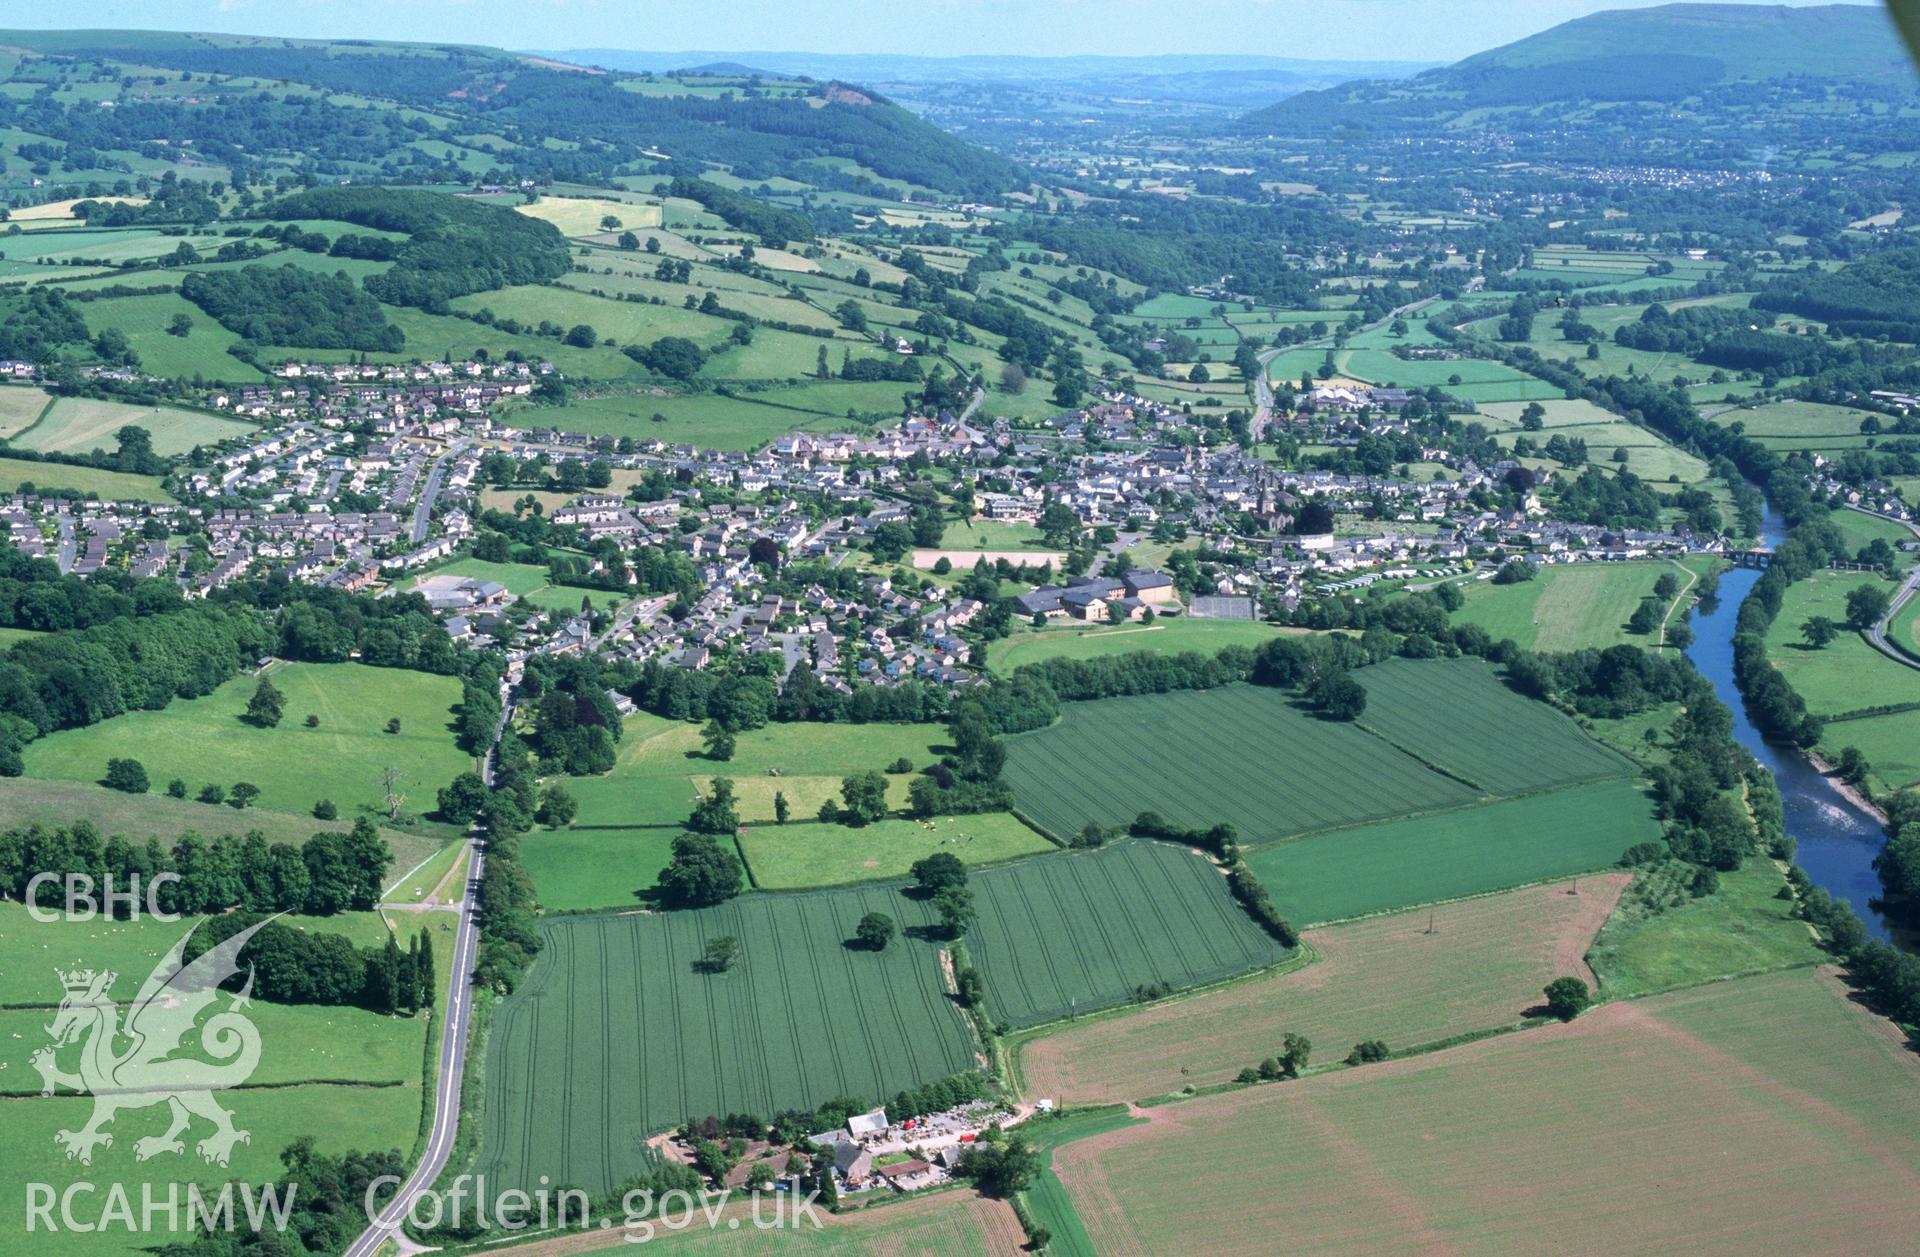 Slide of RCAHMW colour oblique aerial photograph of Crickhowell;crughywel  (medieval Town), taken by T.G. Driver, 21/6/2001.